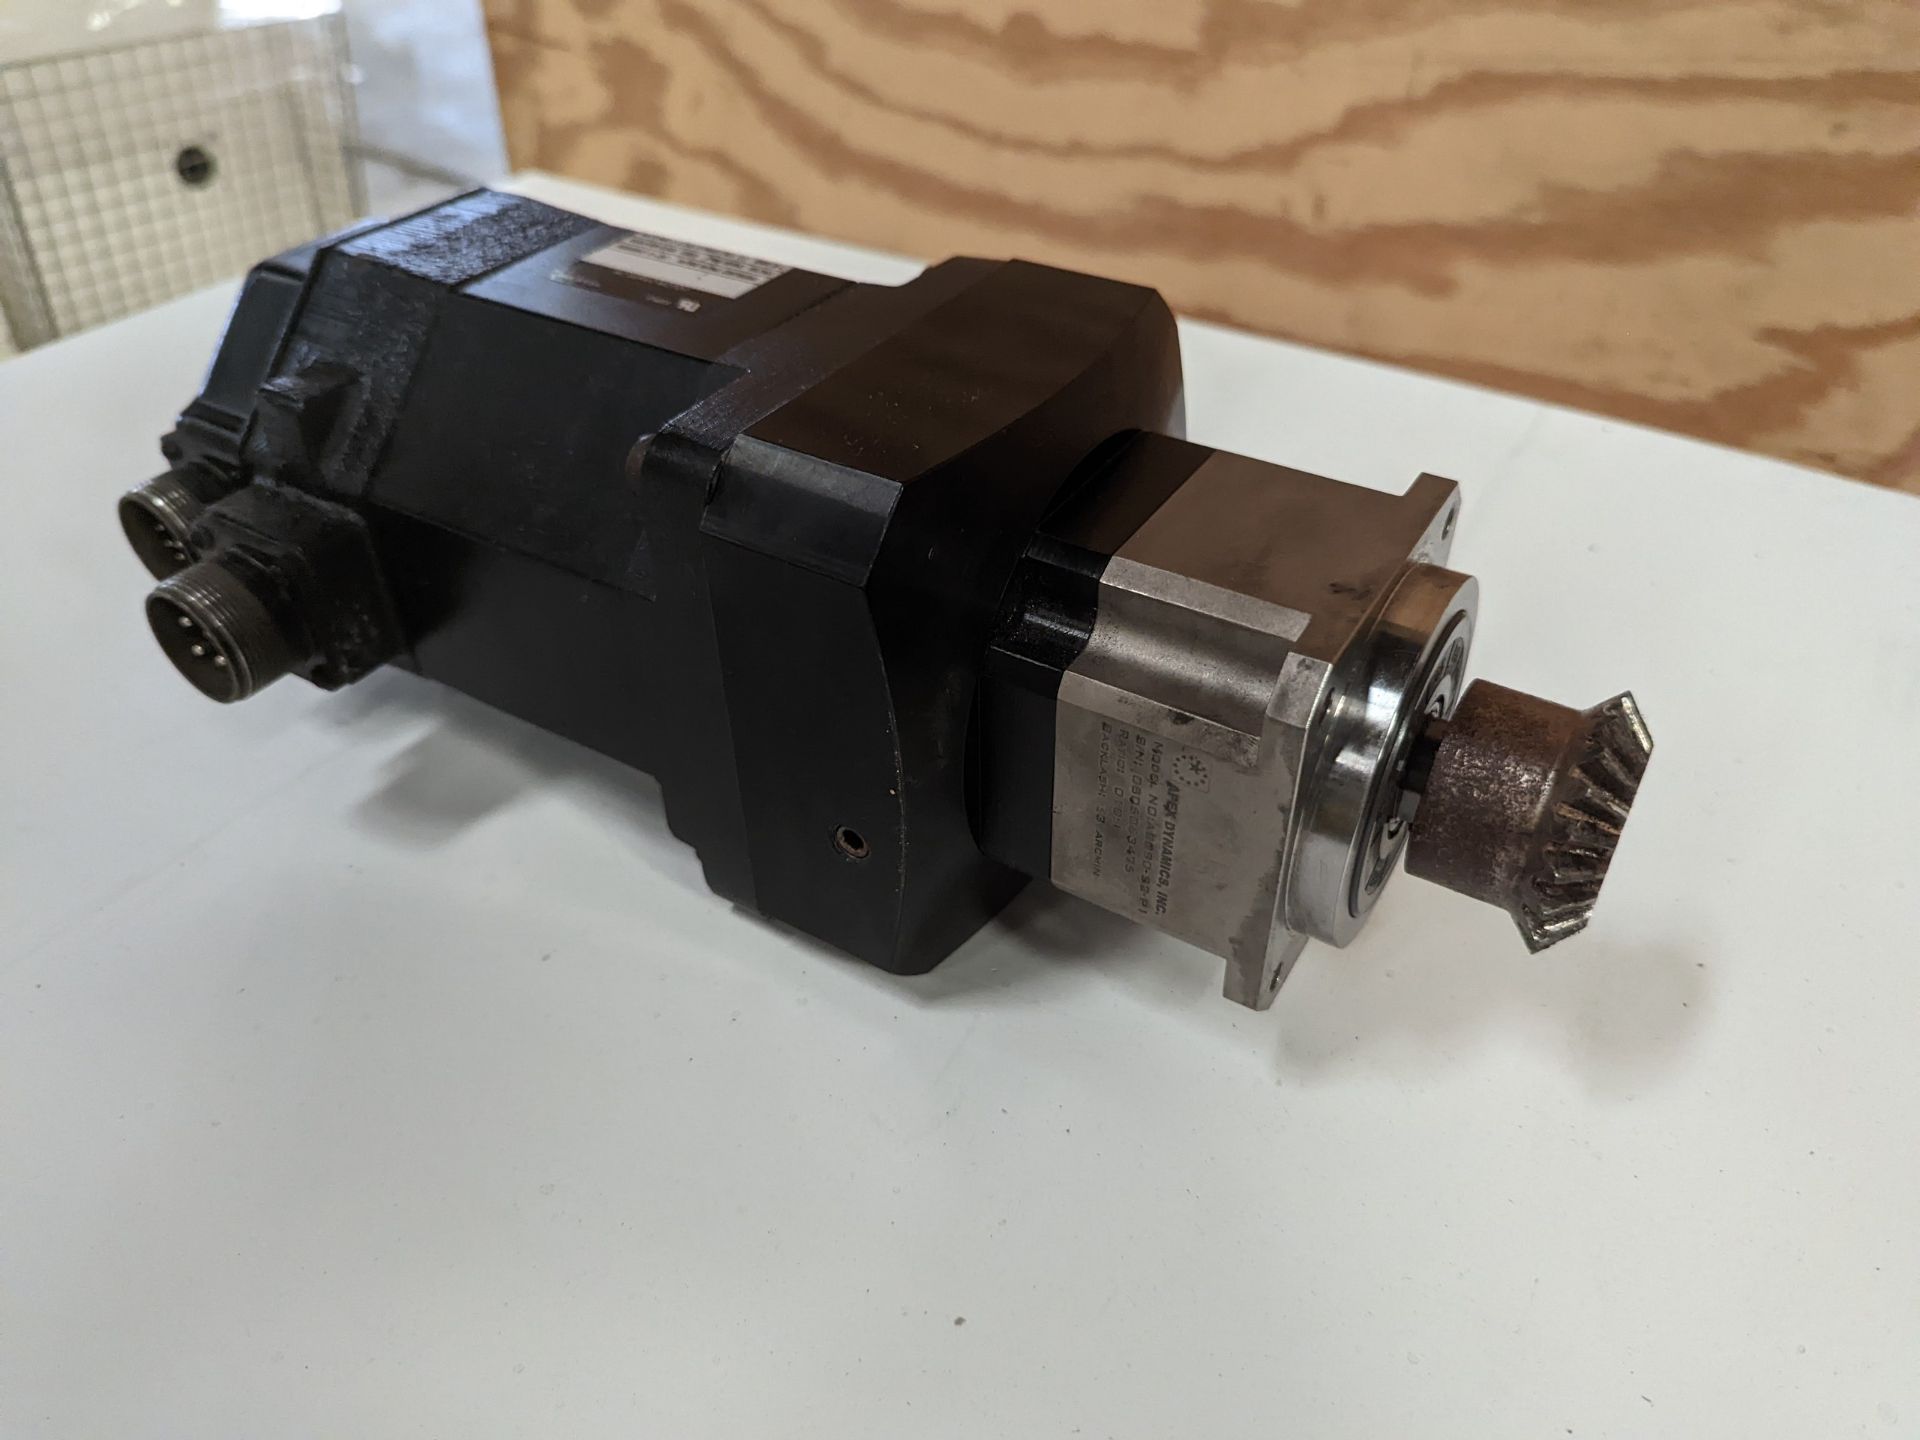 ALLEN-BRADLEY Servo Motor; Model F-4030-Q-H00AA; Max speed 4000 RPM; Includes attached APEX DYNAMICS - Image 8 of 10